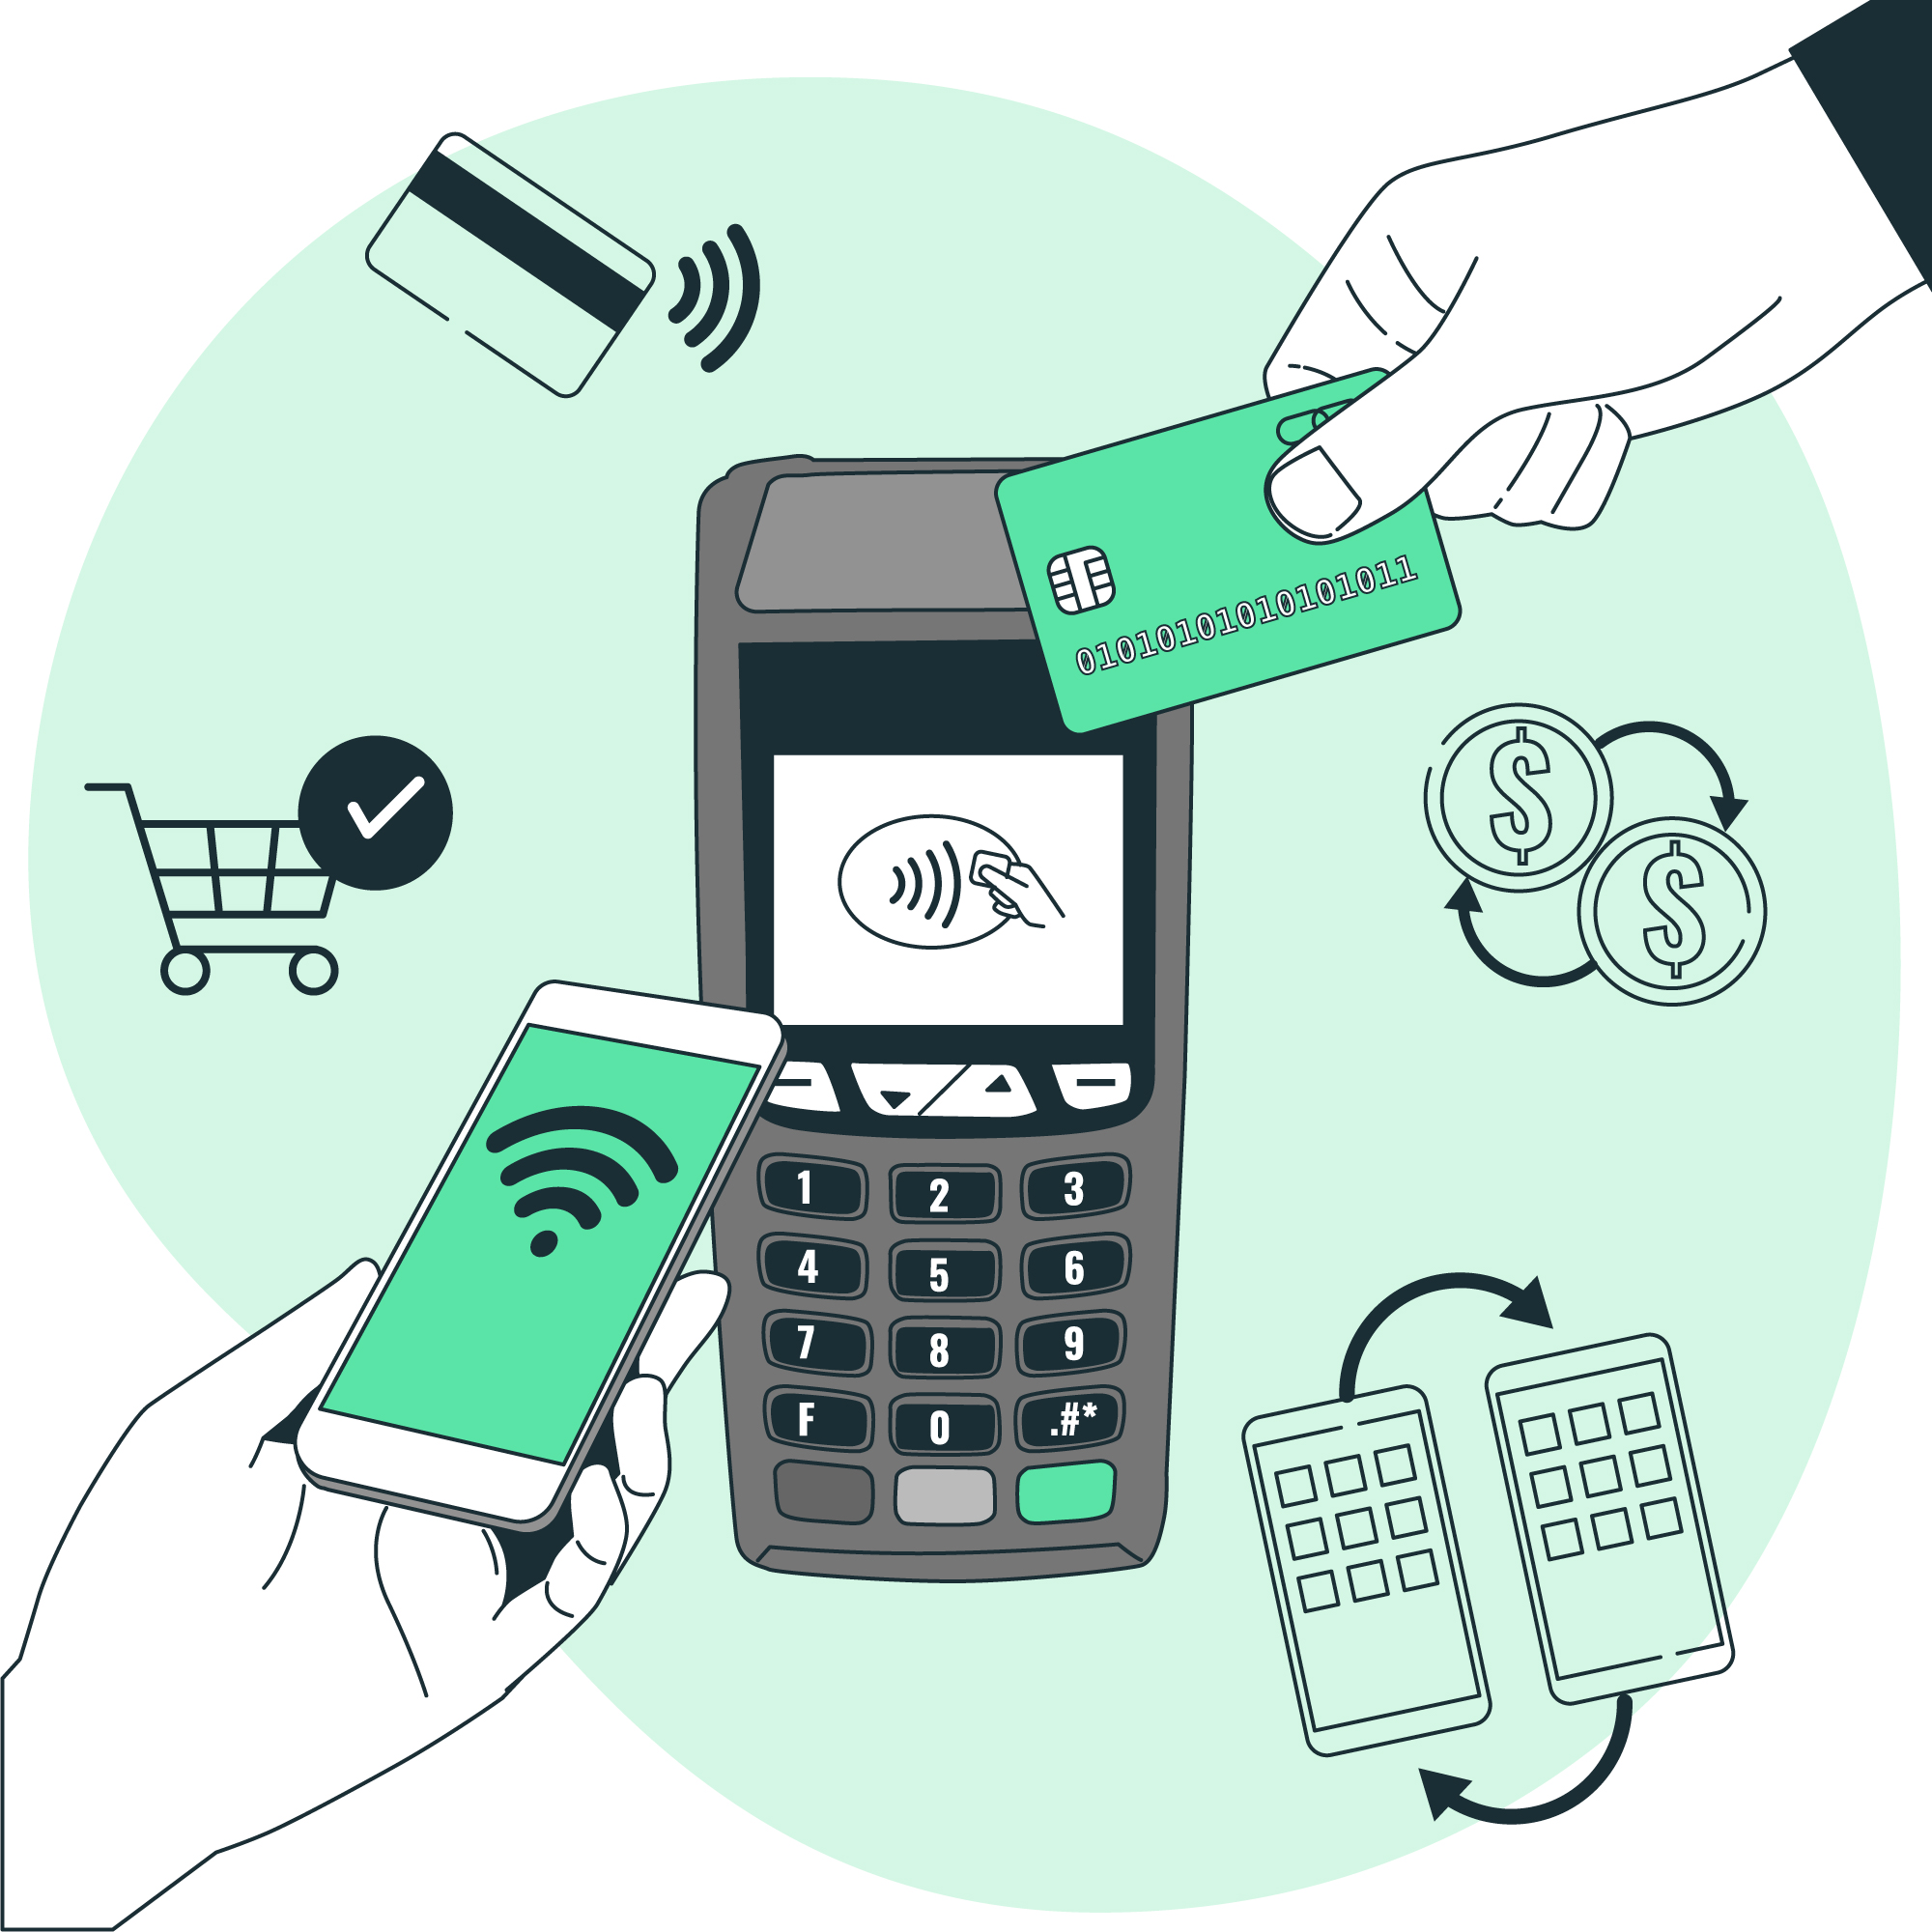 The image illustrates various methods of contactless payment. At the center, there is a payment terminal with a contactless payment symbol on its screen. Surrounding the terminal are hands holding different payment methods: a smartphone with a wireless signal indicating mobile payment, a credit card being tapped, and another card in the background. There are also icons of a shopping cart with a checkmark, dollar coins with arrows indicating transactions, and two smartphones with arrows between them, symbolizing mobile money transfers. The overall theme emphasizes the convenience and variety of contactless payment options.